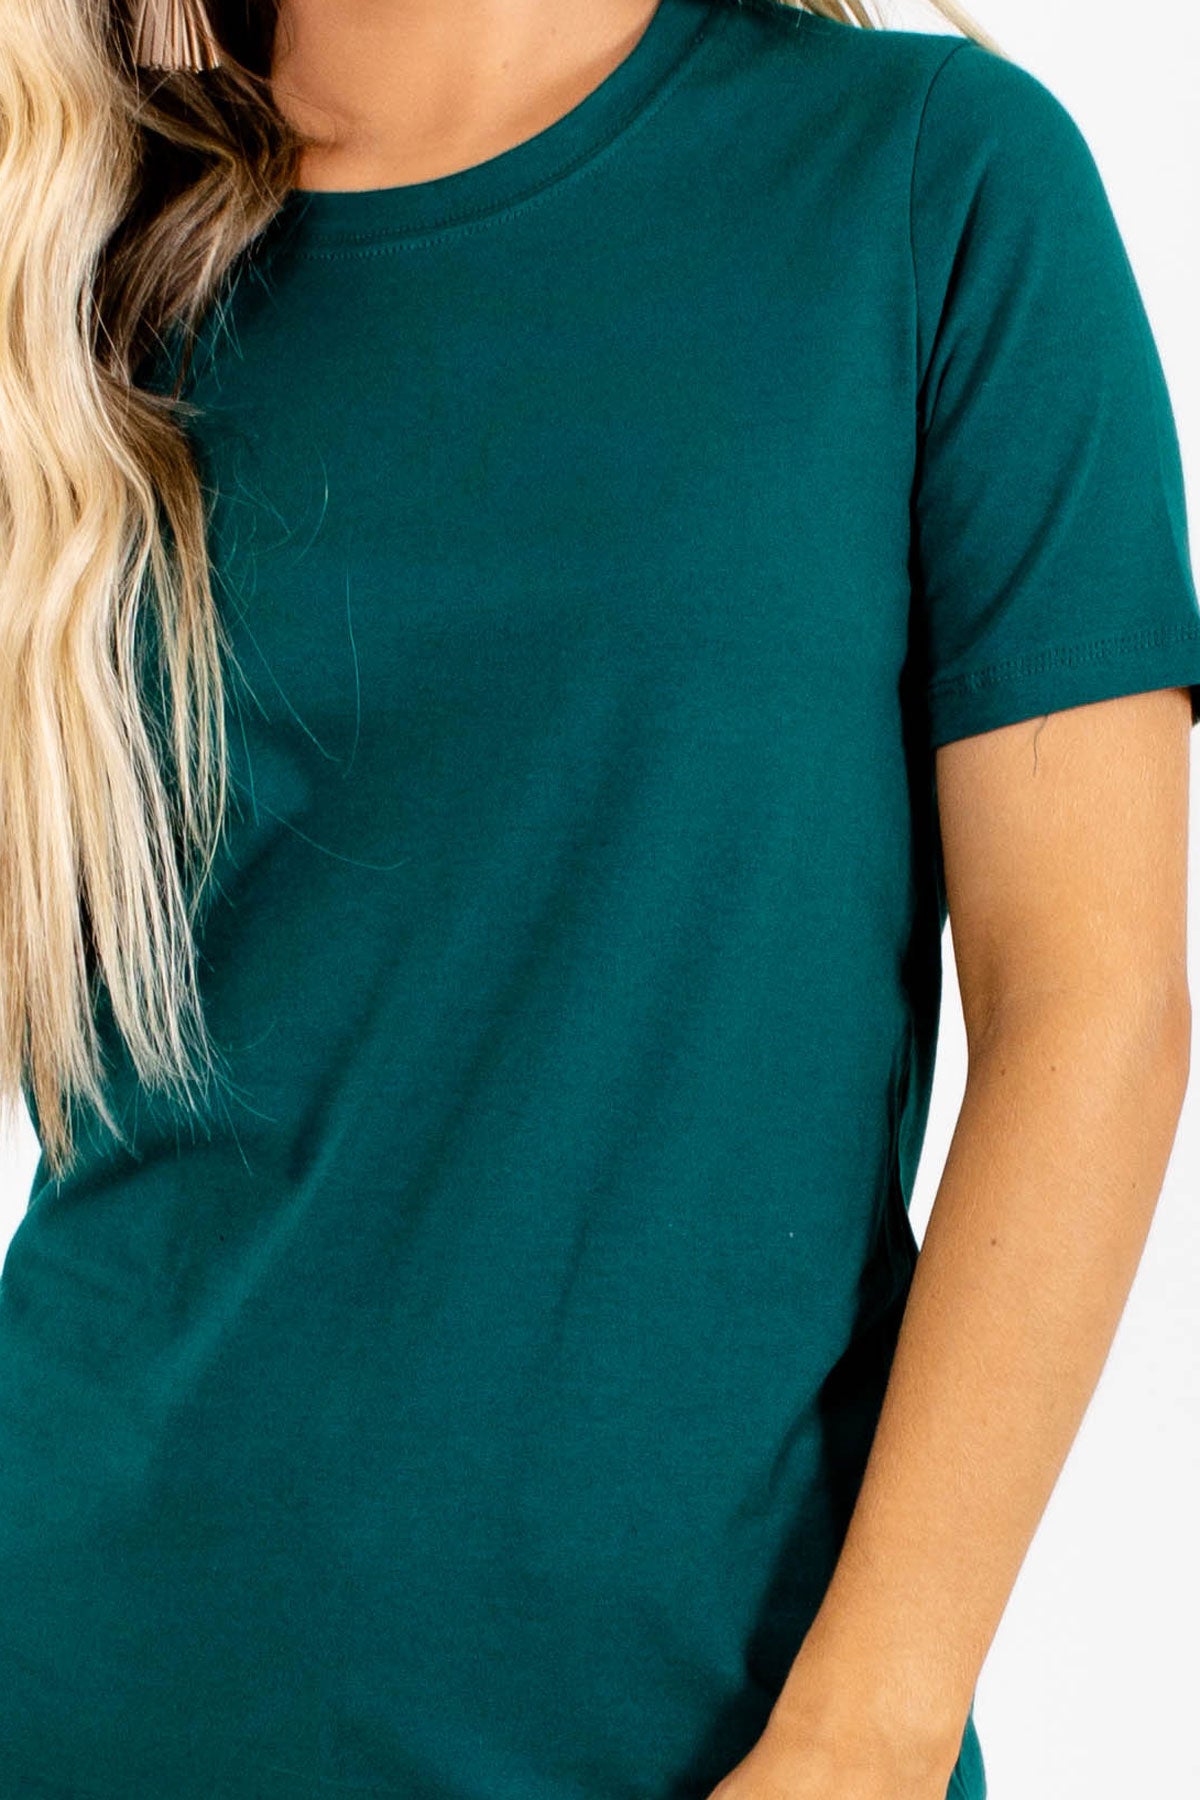 Green Cute and Comfortable Boutique Top for Women